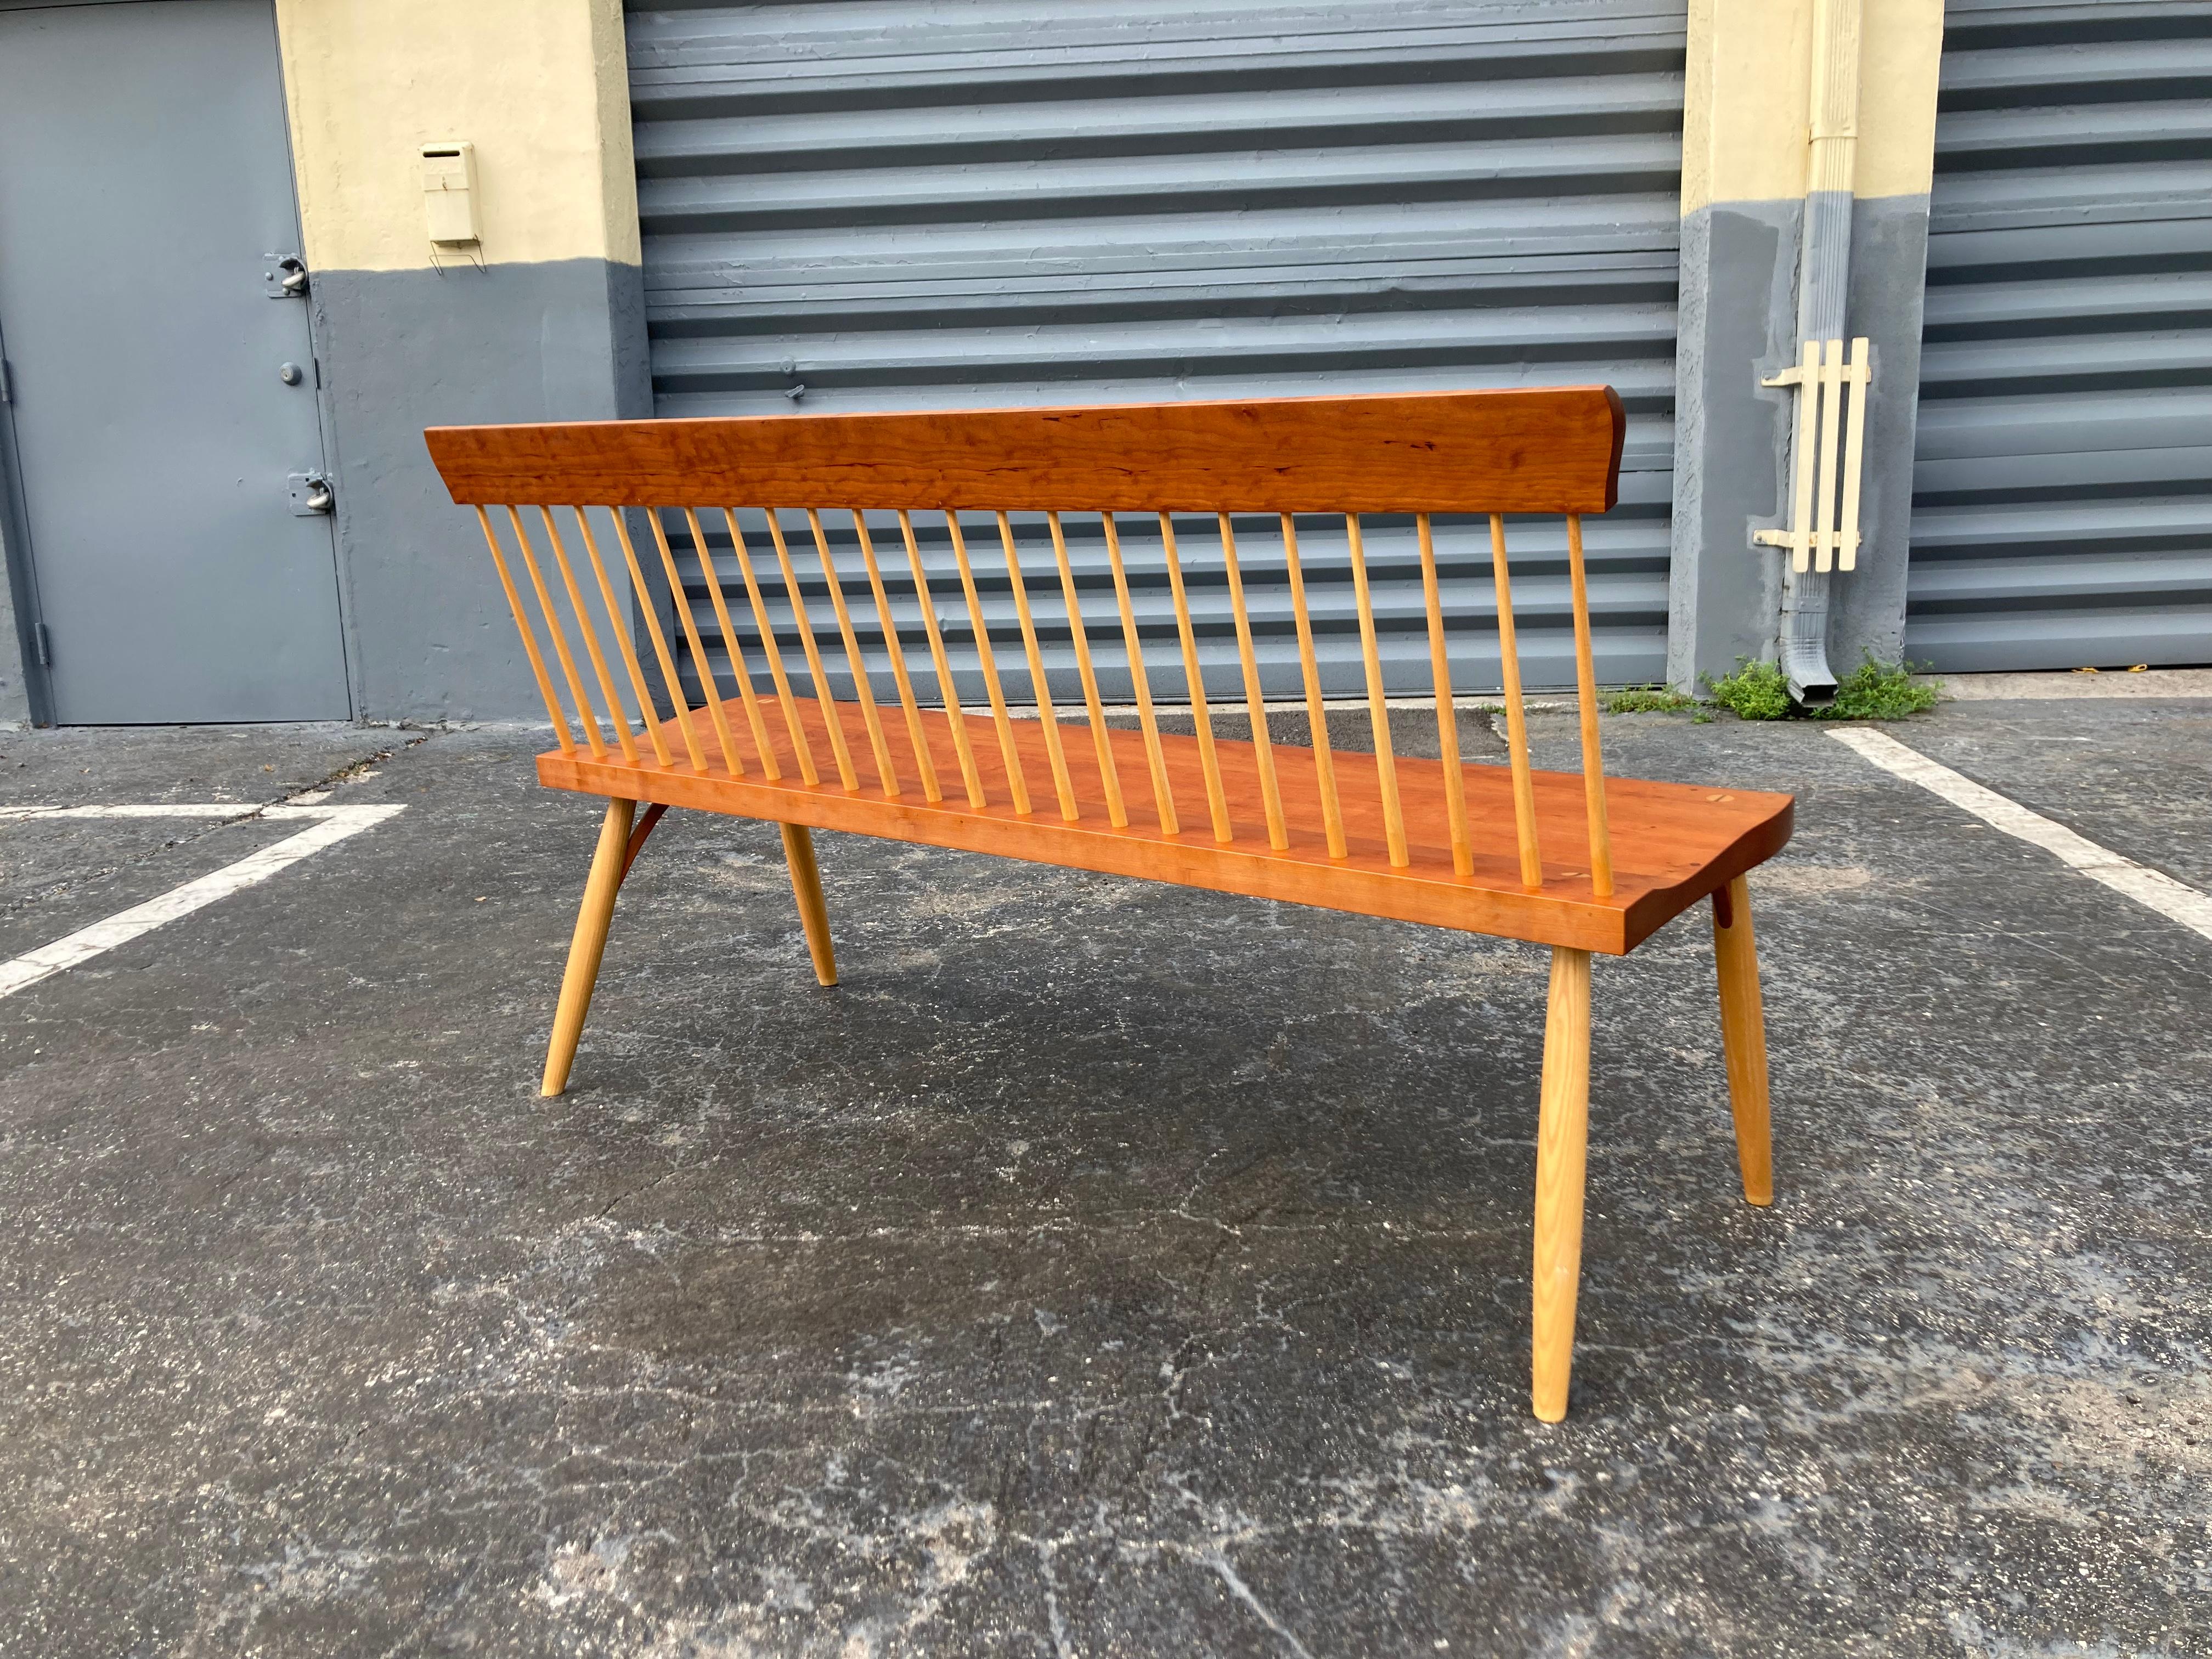 Handmade Moser Bench from 2015 in Cherry. In good condition with some normal wear. Please see our other listings for more Moser furniture.